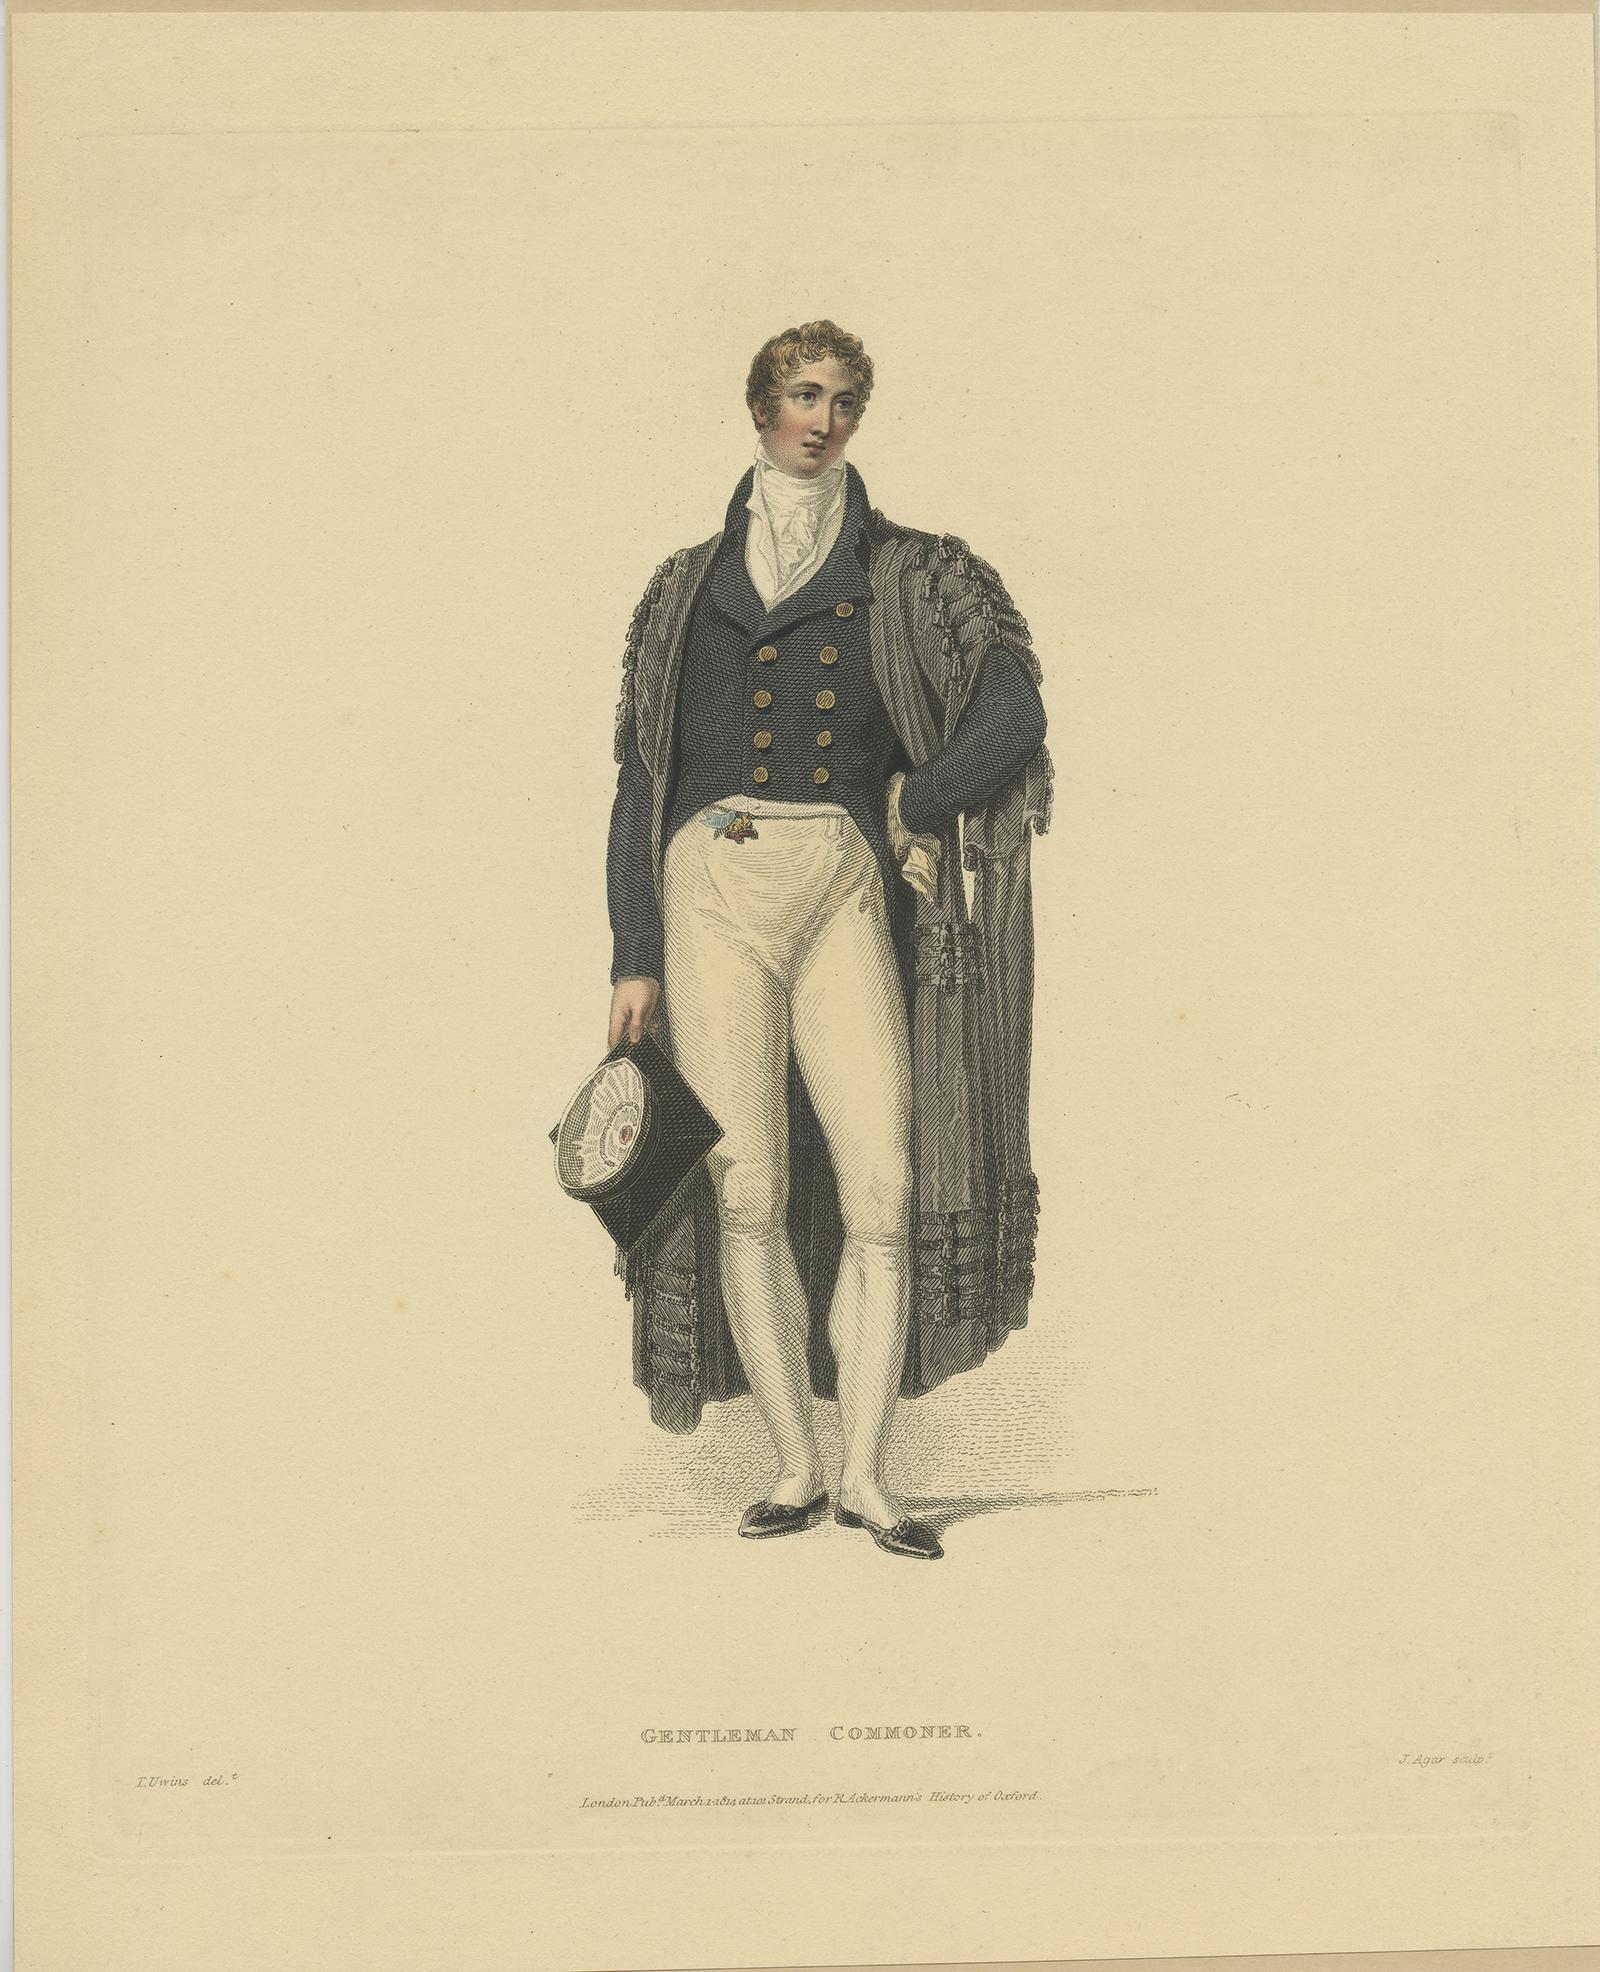 Antique print titled 'Gentleman Commoner'. Portrait of a gentleman-commoner, made after a drawing by Thomas Uwins. This print originates from 'Ackermann's History of Oxford and History of Cambridge'. 

Artists and Engravers: Printed for R.